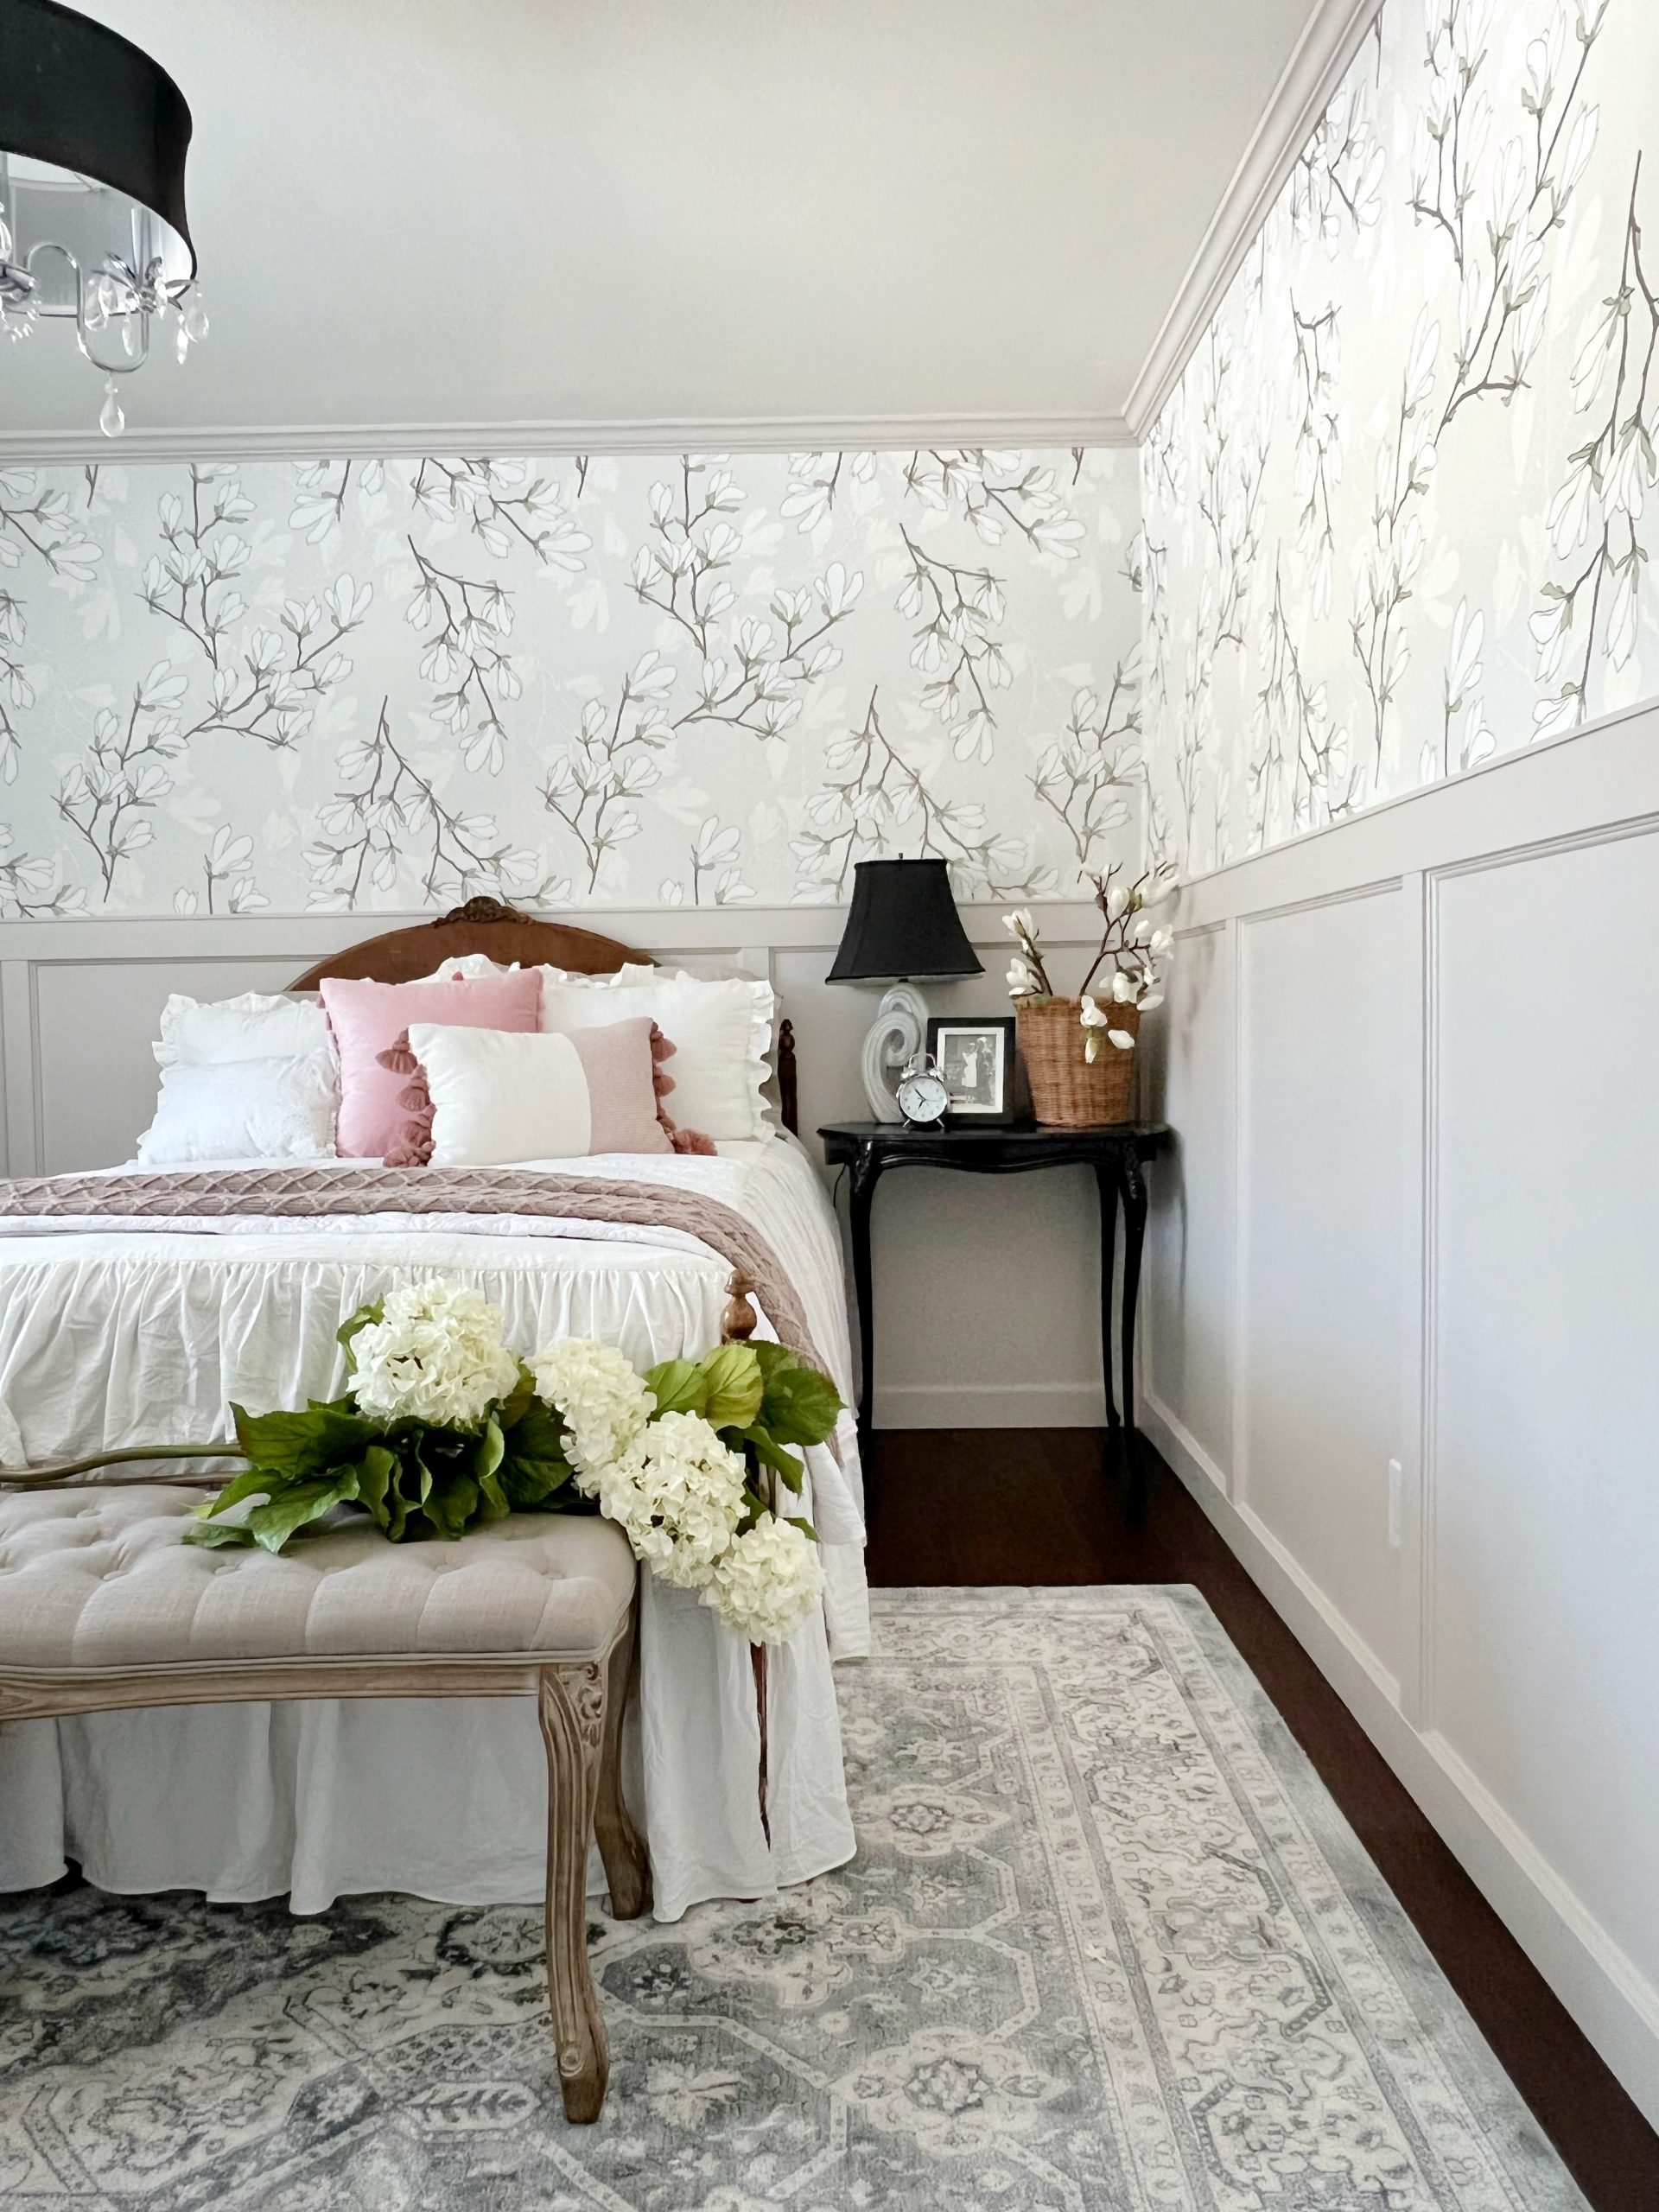 Bedroom with greige board and batten wainscoting and floral wallpaper. A black night stand sits along side the bed with a grey and black lamp, alarm clock and magnolia flowers in a basket. The bed has a ruffled white bedspread.